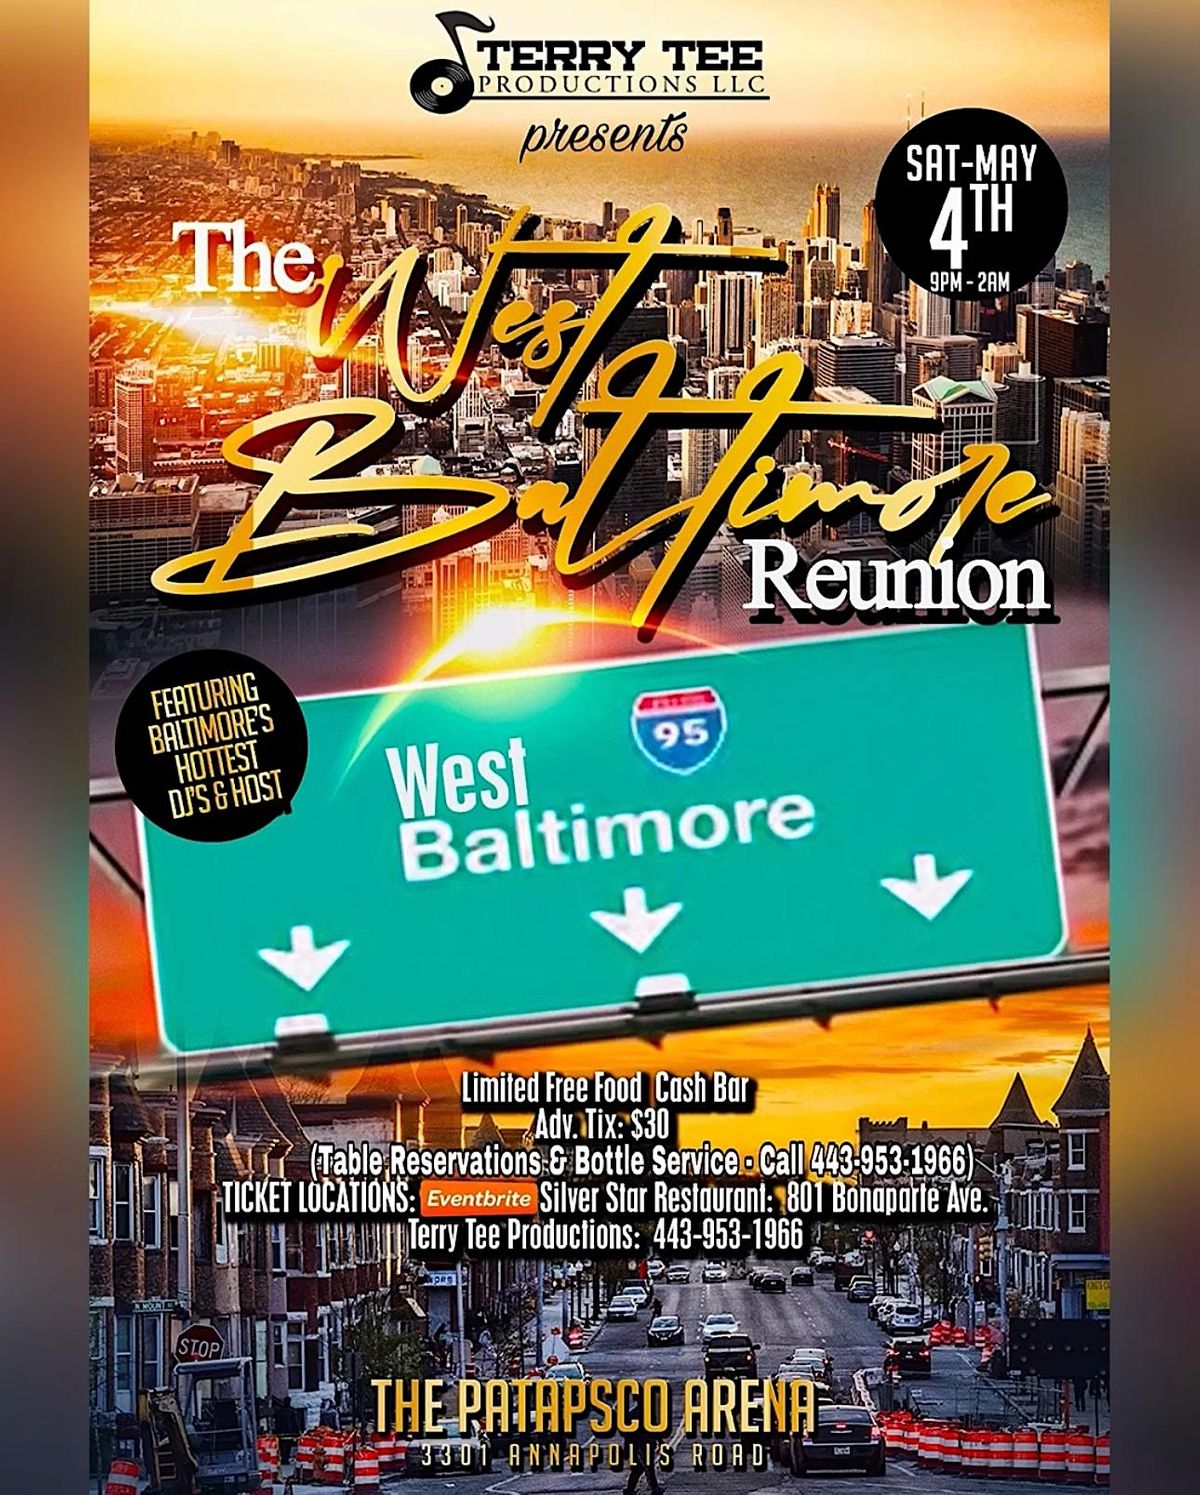 THE WEST BALTIMORE REUNION - MAY 4TH.